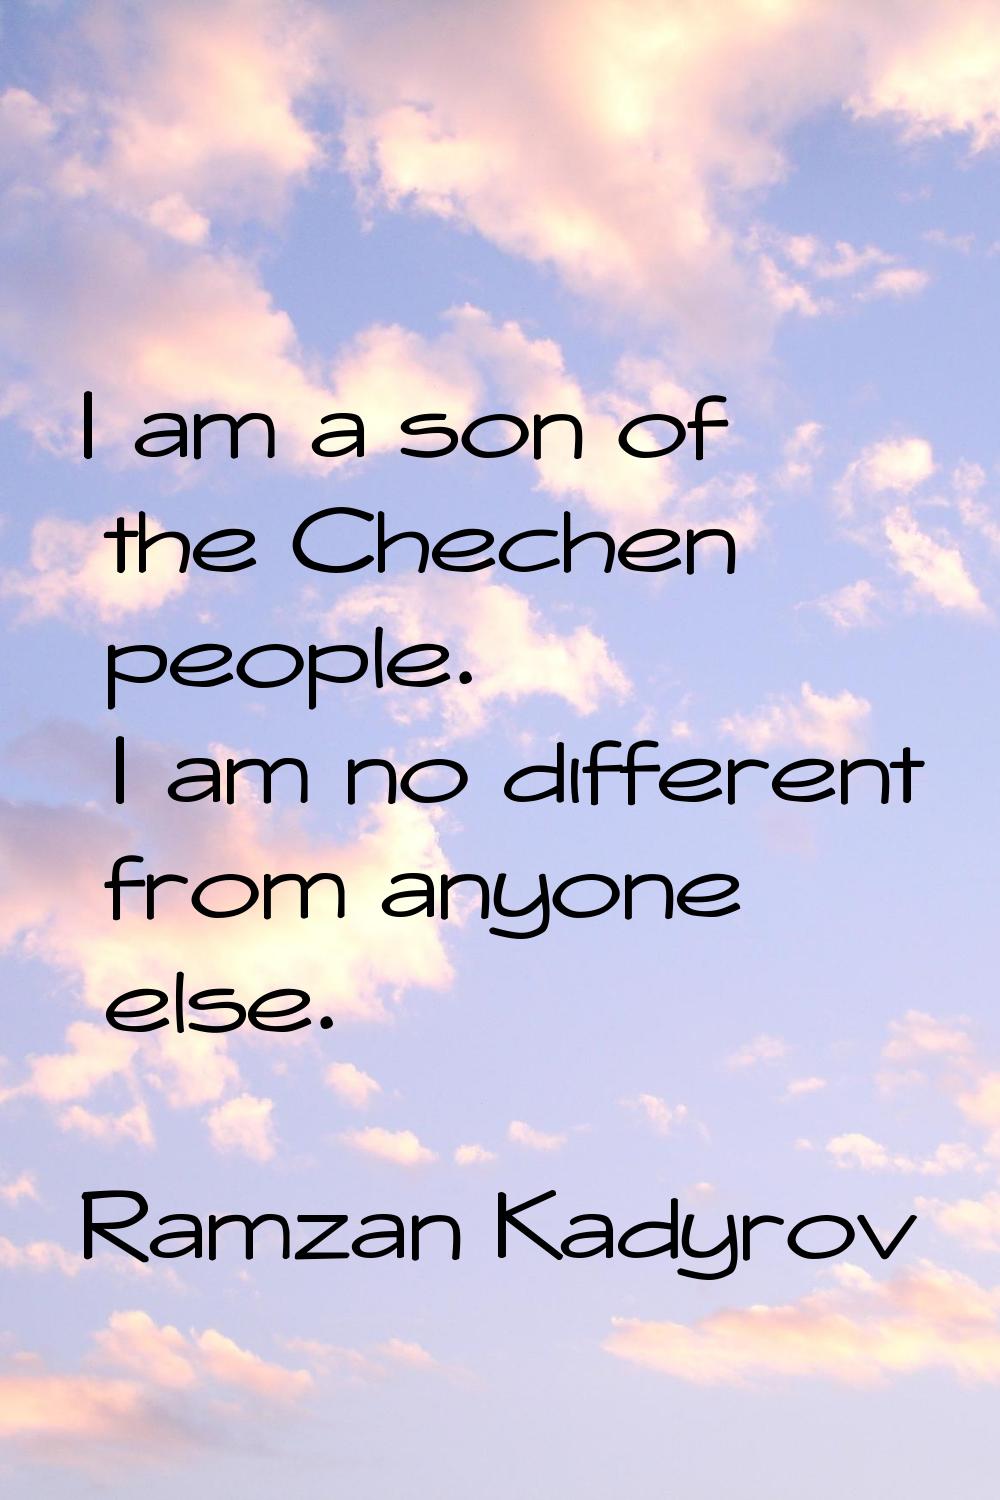 I am a son of the Chechen people. I am no different from anyone else.